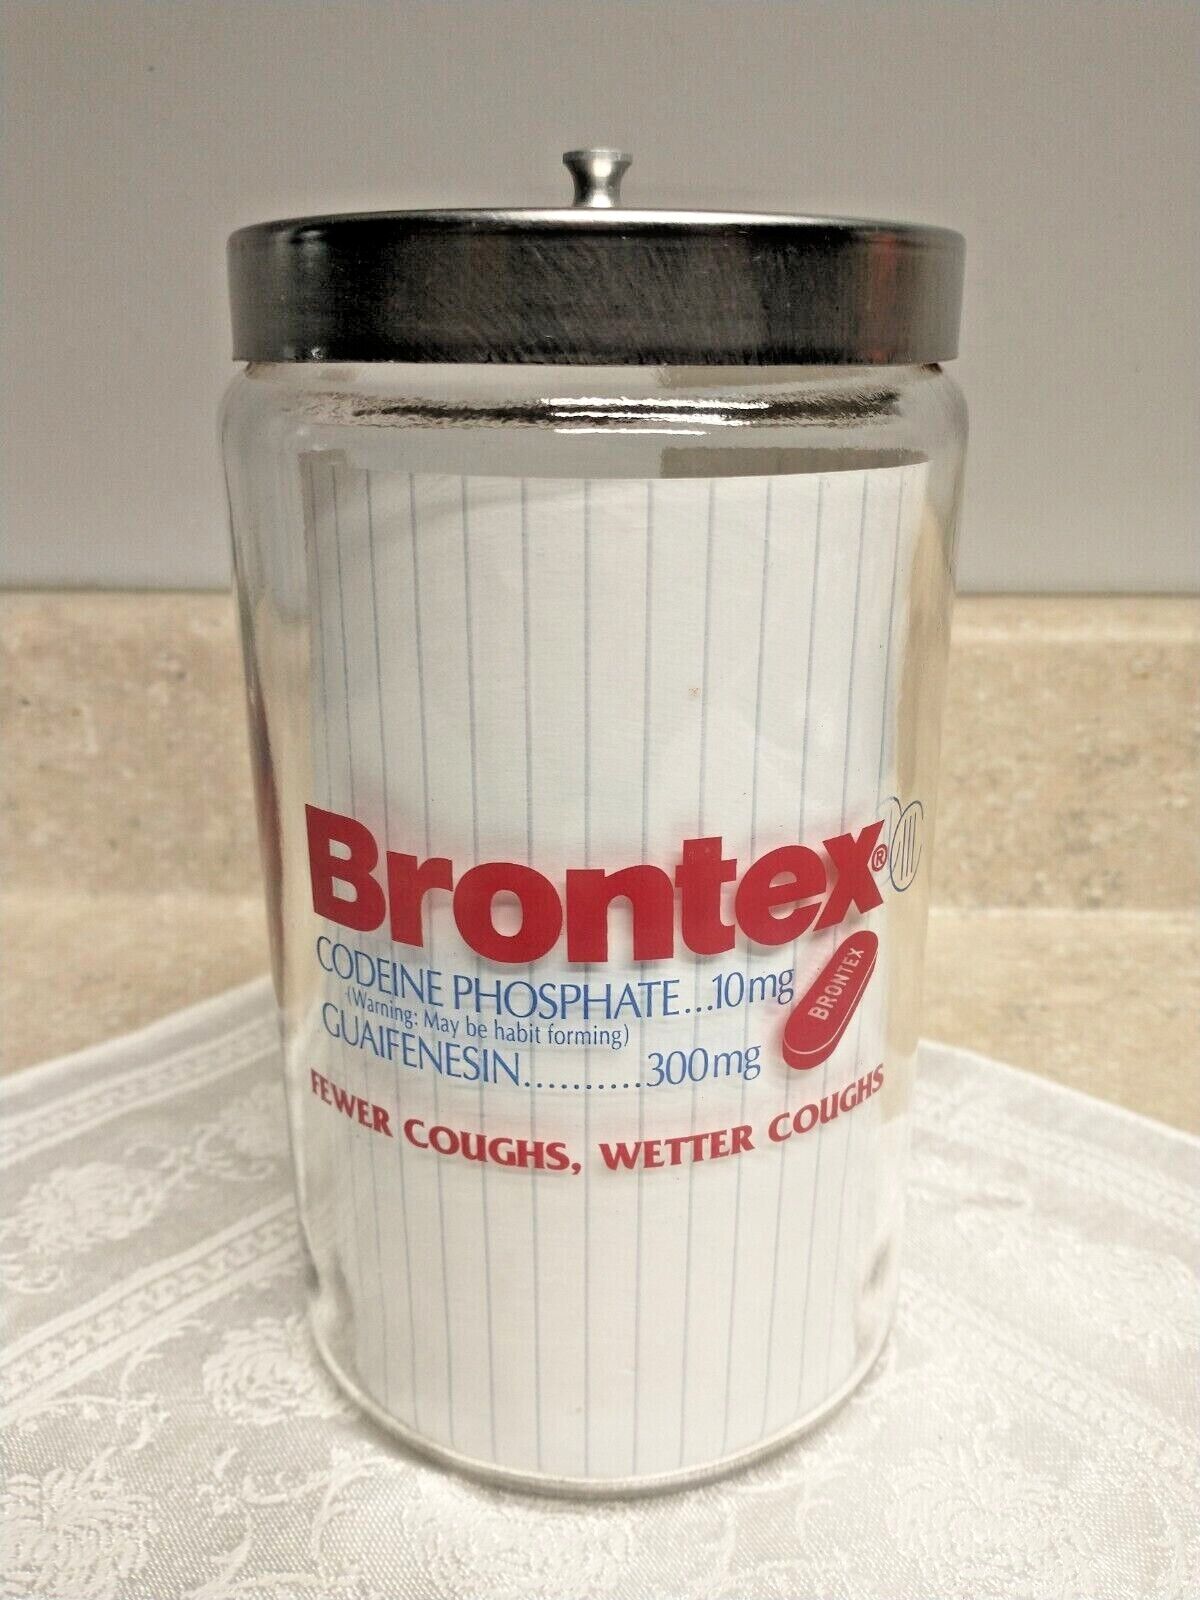 Brontex Codeine Sched 3 Pharmaceutical Advertising Glass Apothecary Jar Drug Rep